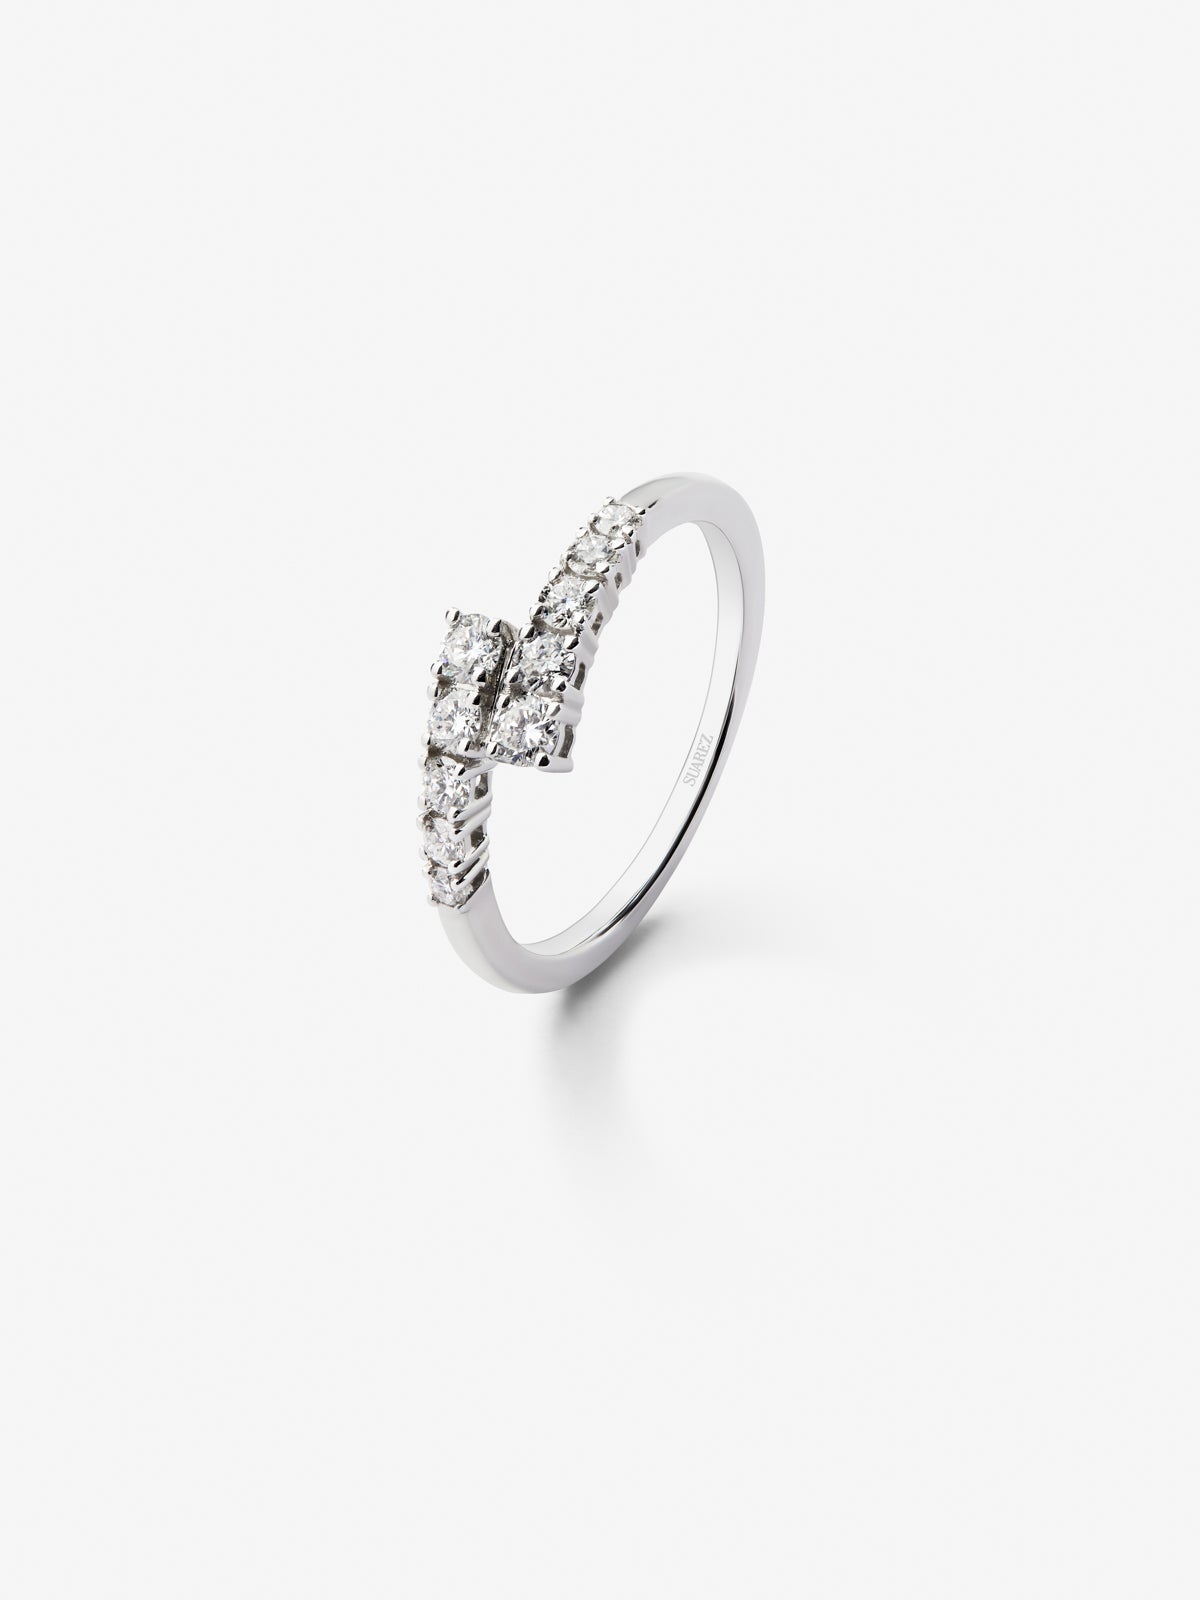 You and me ring in 18K white gold with 10 brilliant-cut diamonds with a total of 0.4 cts